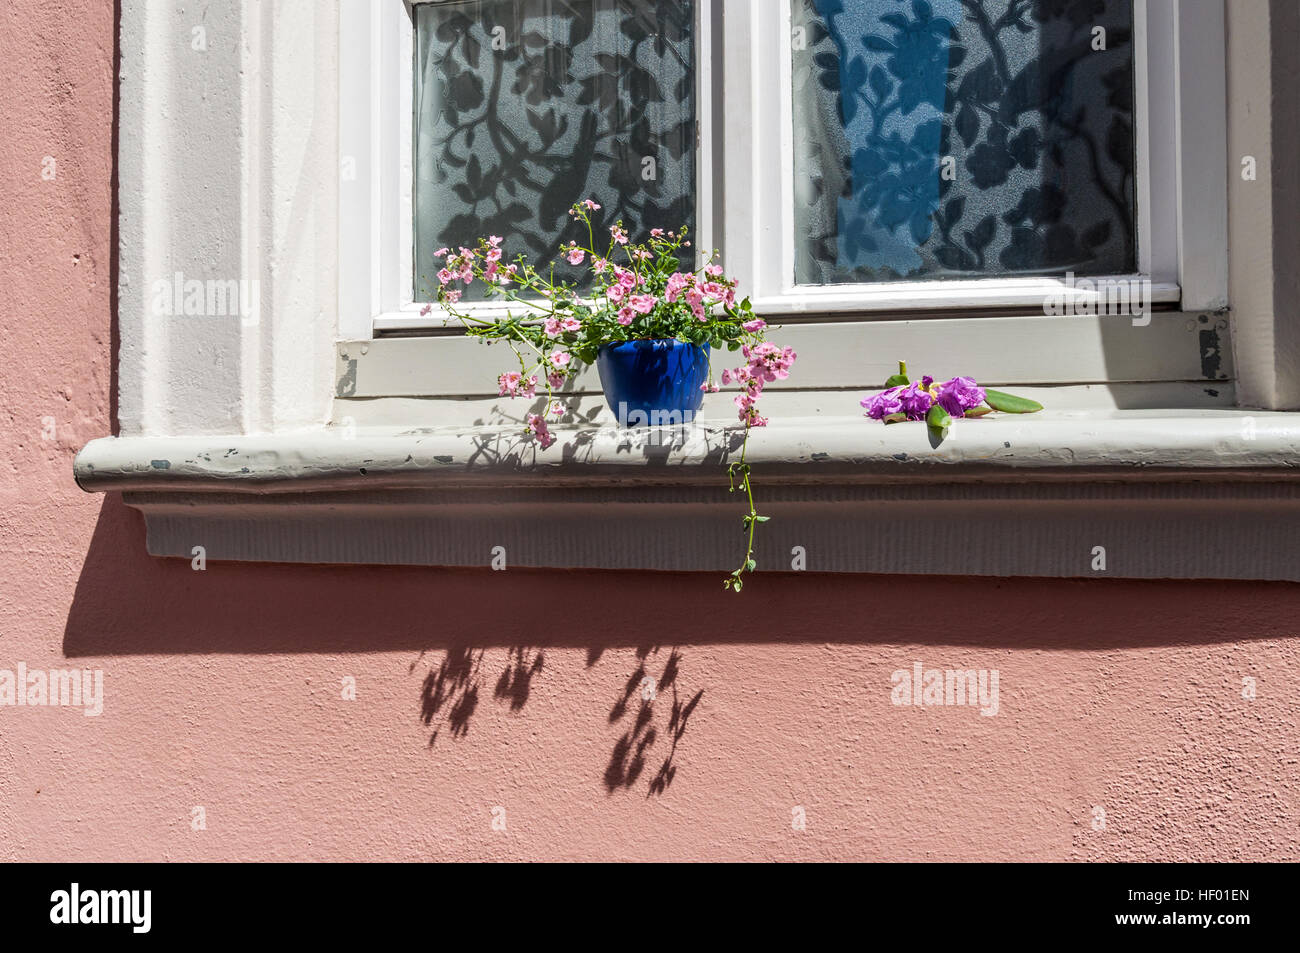 An old house window decorated with flower pots in Bamberg, Germany Stock Photo